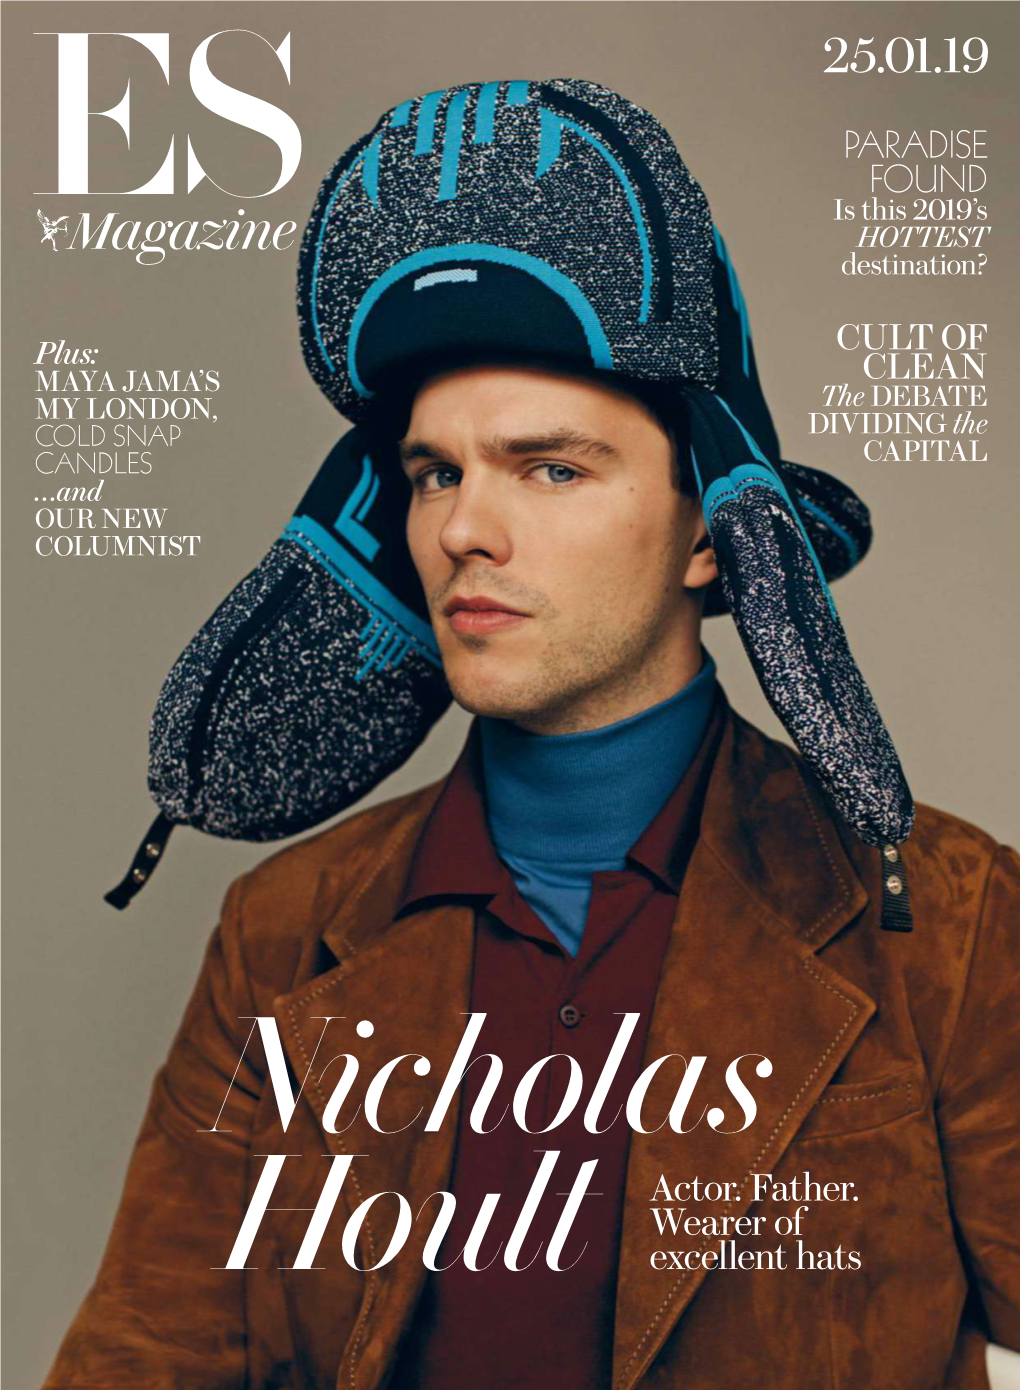 Hoult Actor. Father. Wearer of Excellent Hats